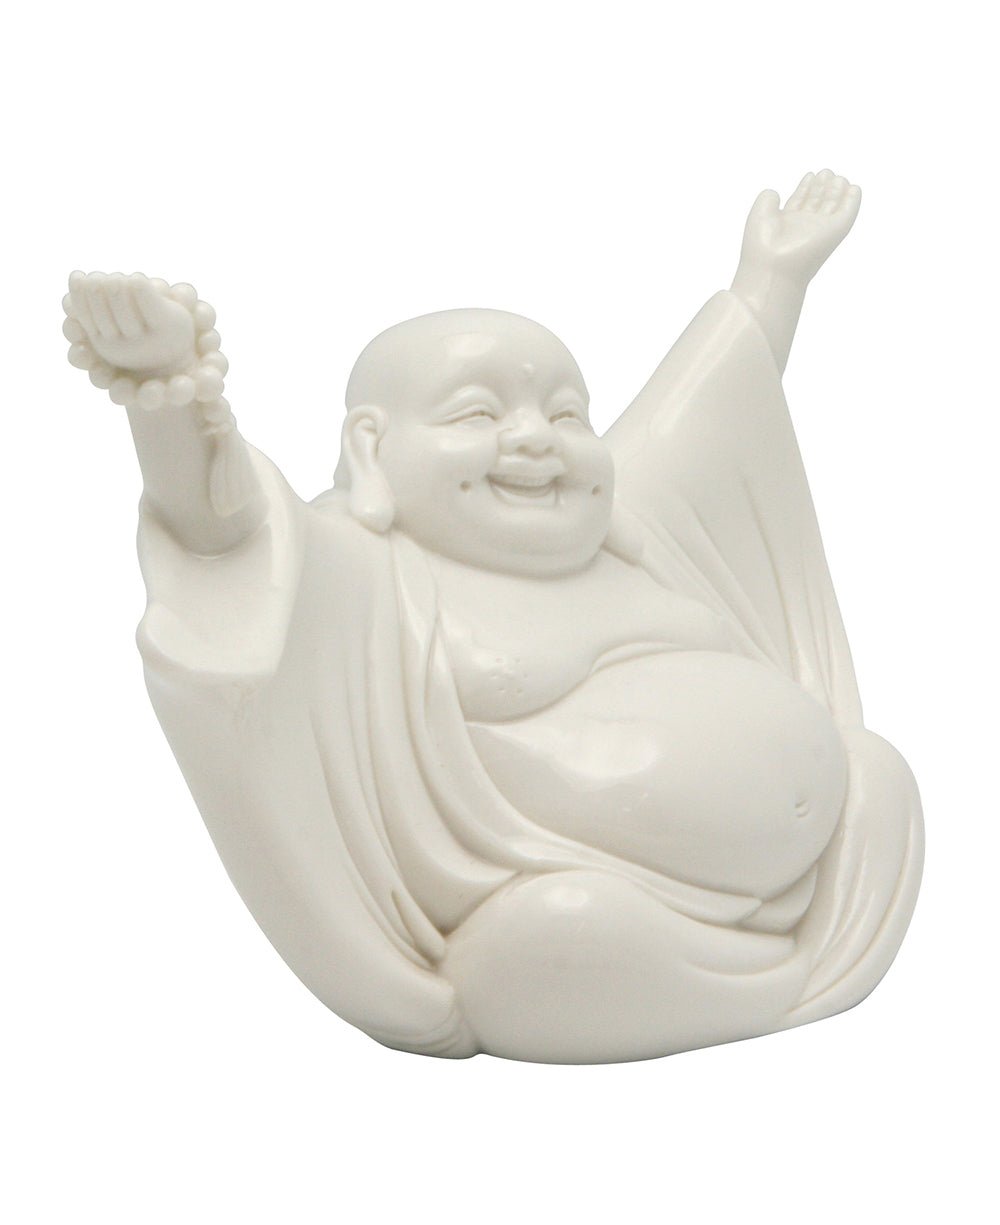 Cheering Happy Buddha Porcelain Statue - Sculptures & Statues